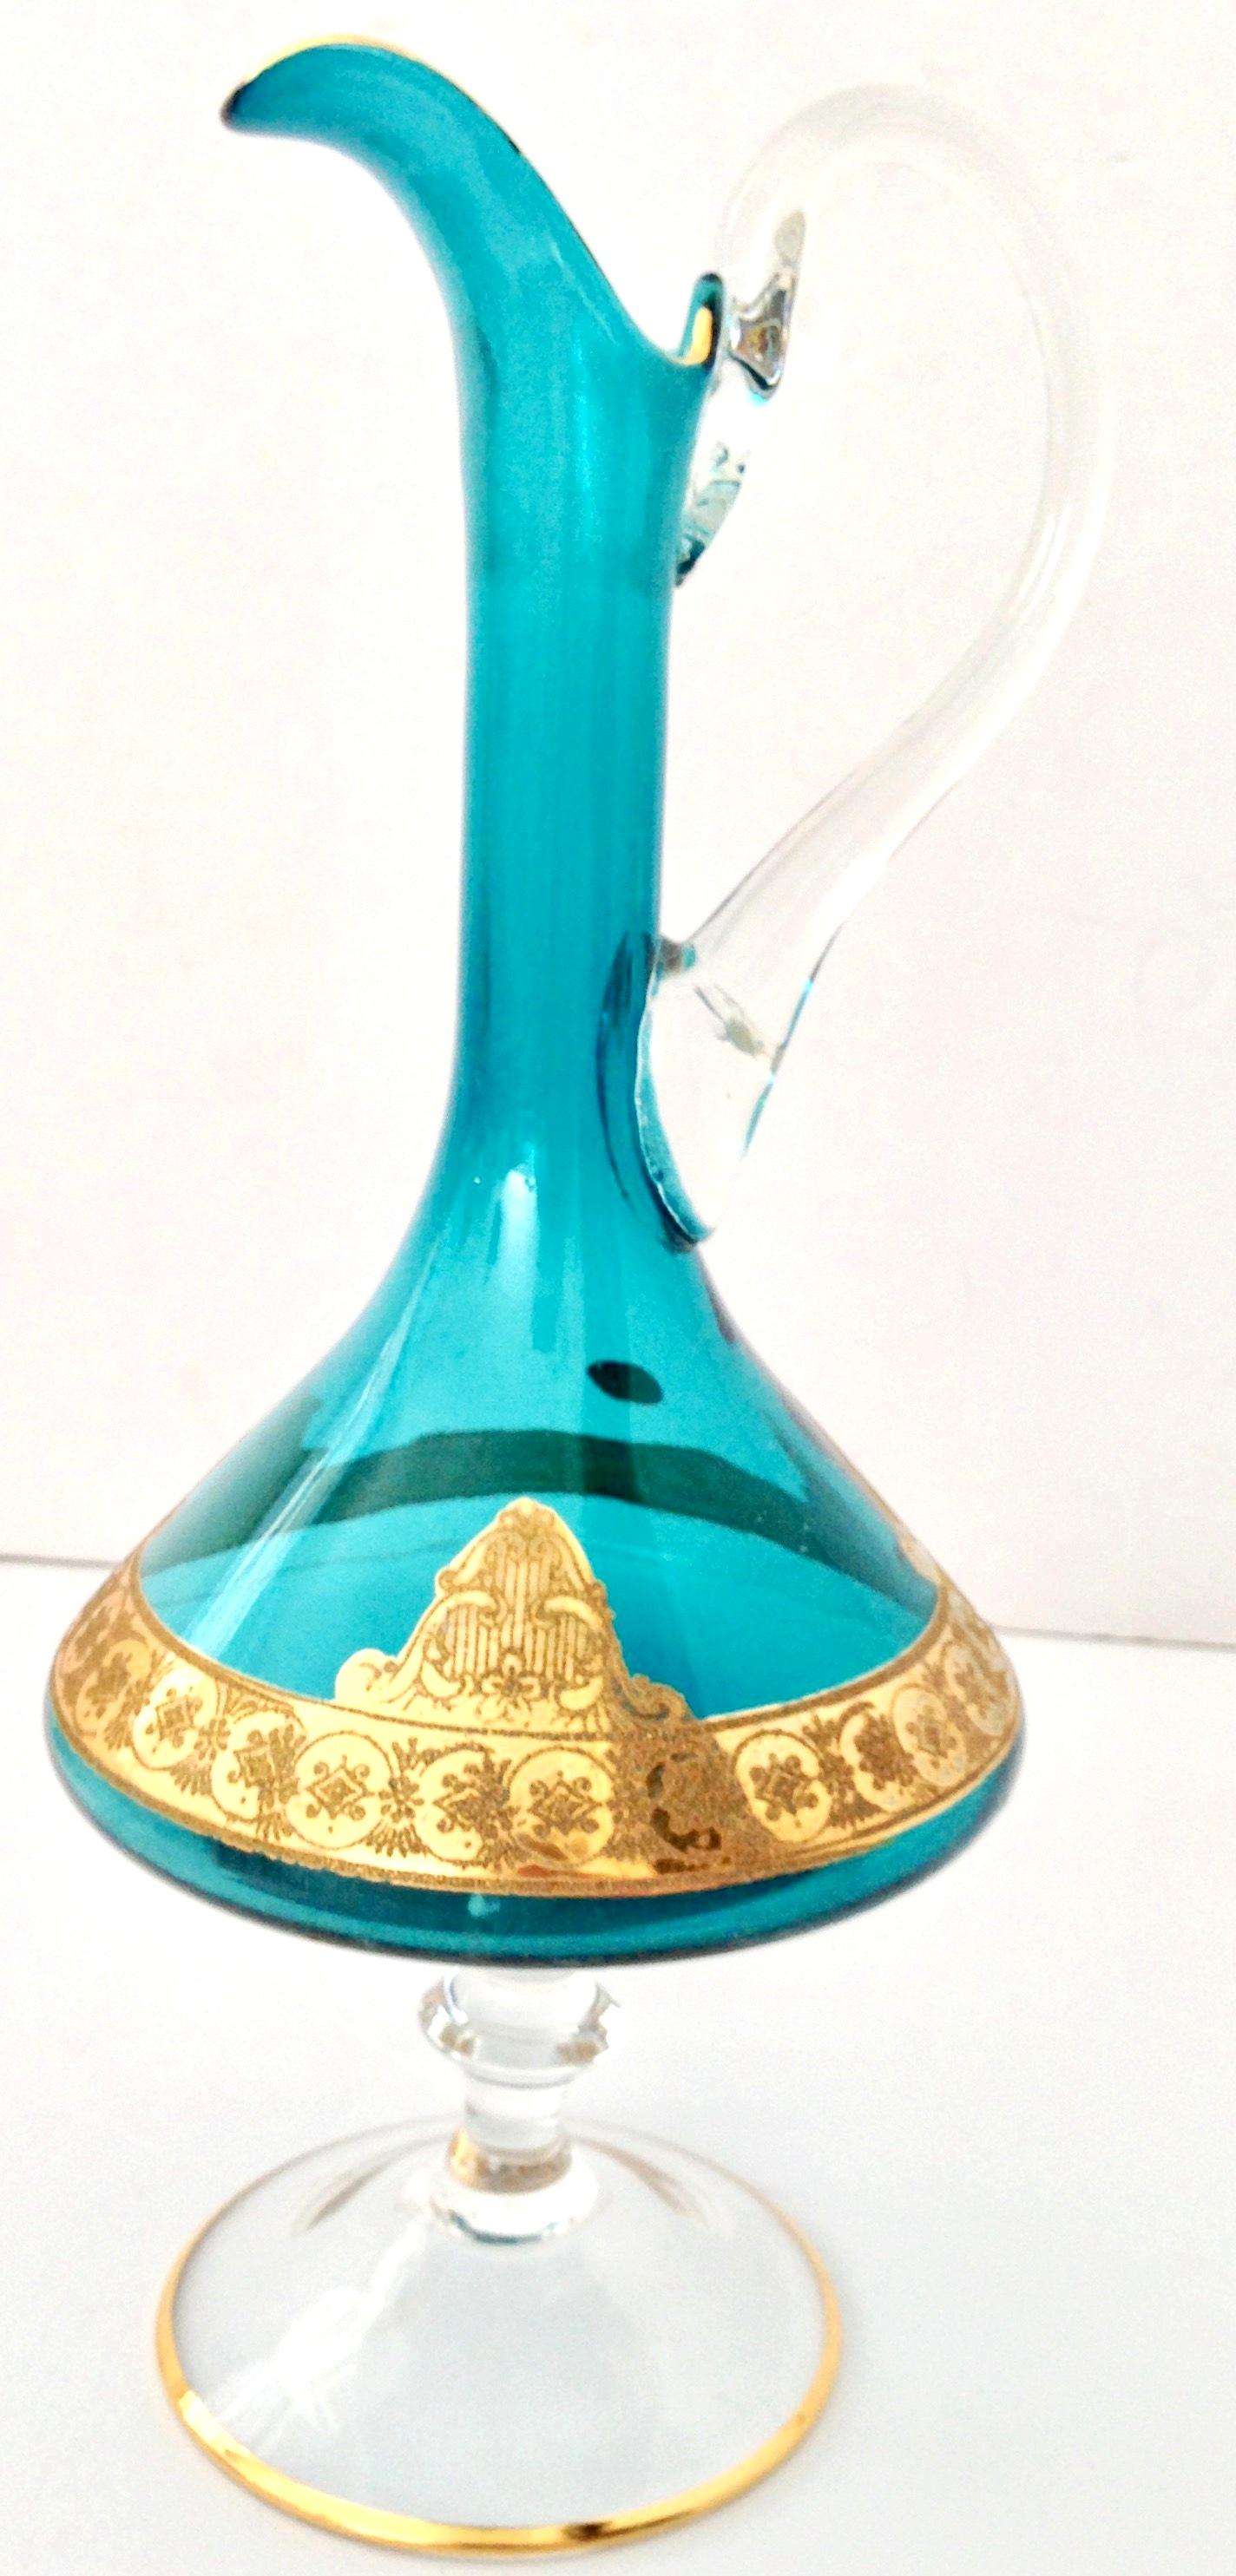 Mid-20th Century Italian Venetian Glass & 22K Gold Mediterranean Blue Footed Beverage Pitcher. The original manufacturer tag is present and reads, made in Italy.